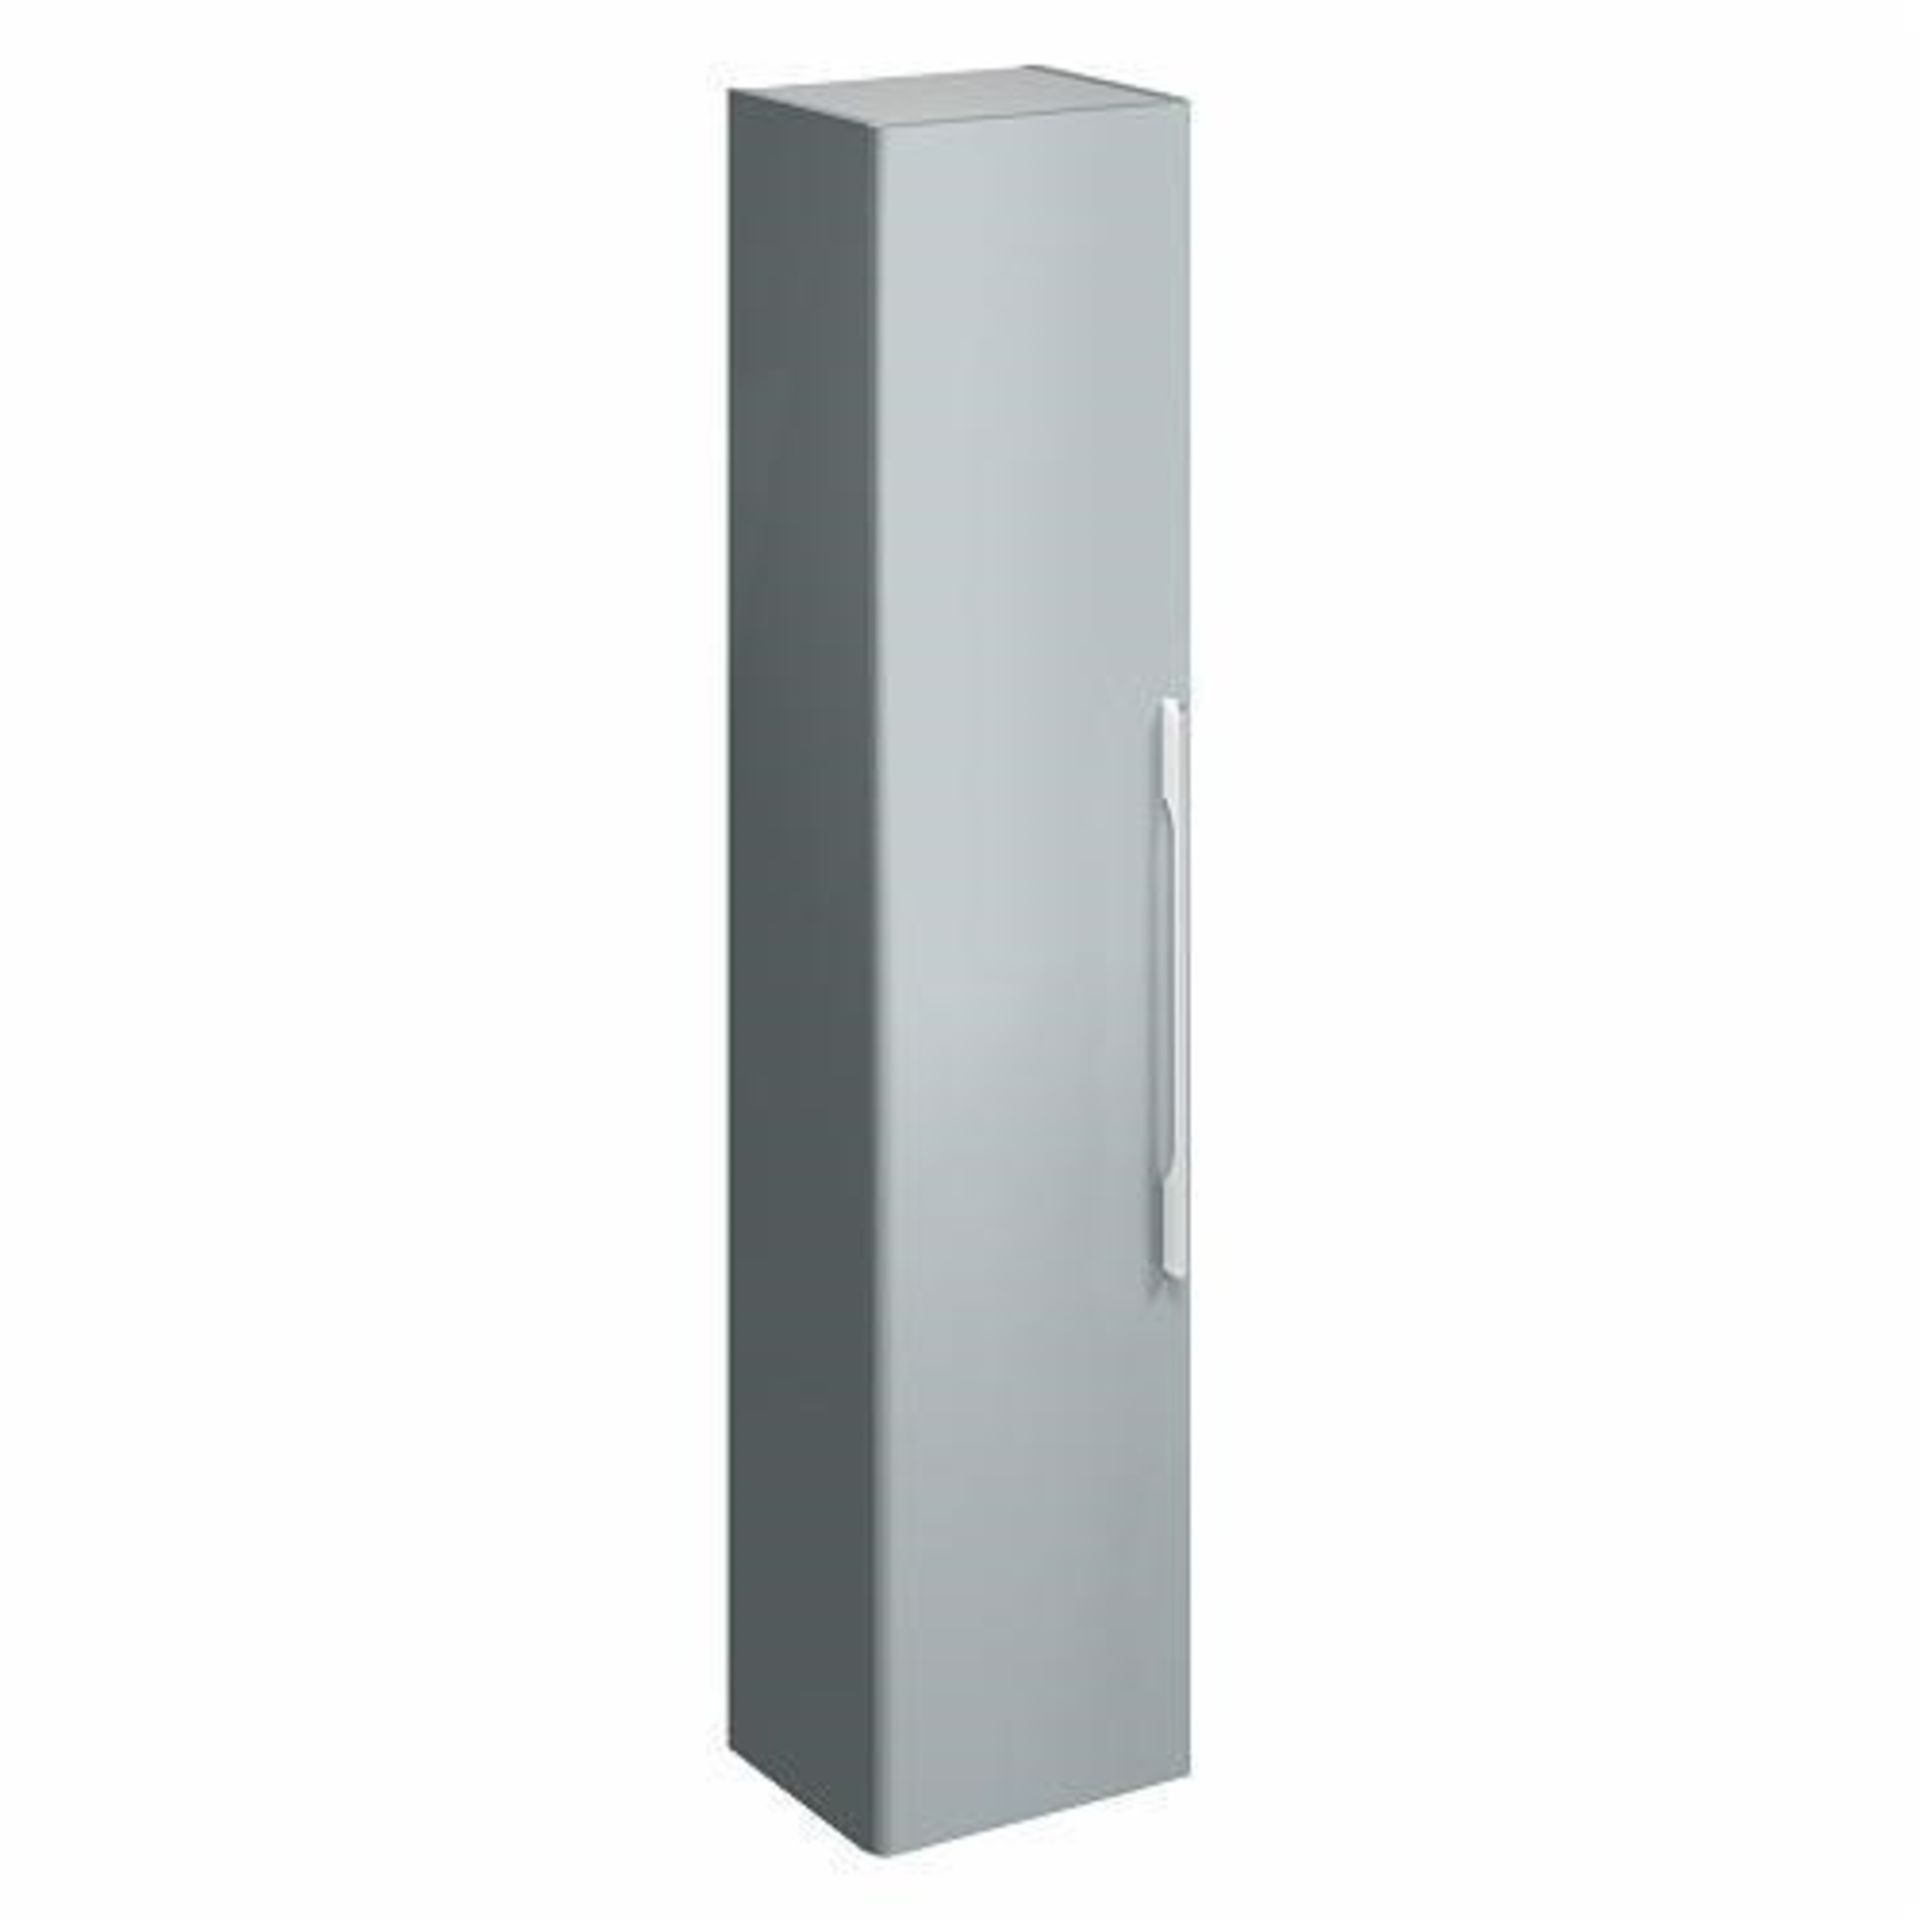 (CE124) Twyfords 1800mm Grey Tall Storage Unit. RRP £864.99.One door with soft closing mechan...